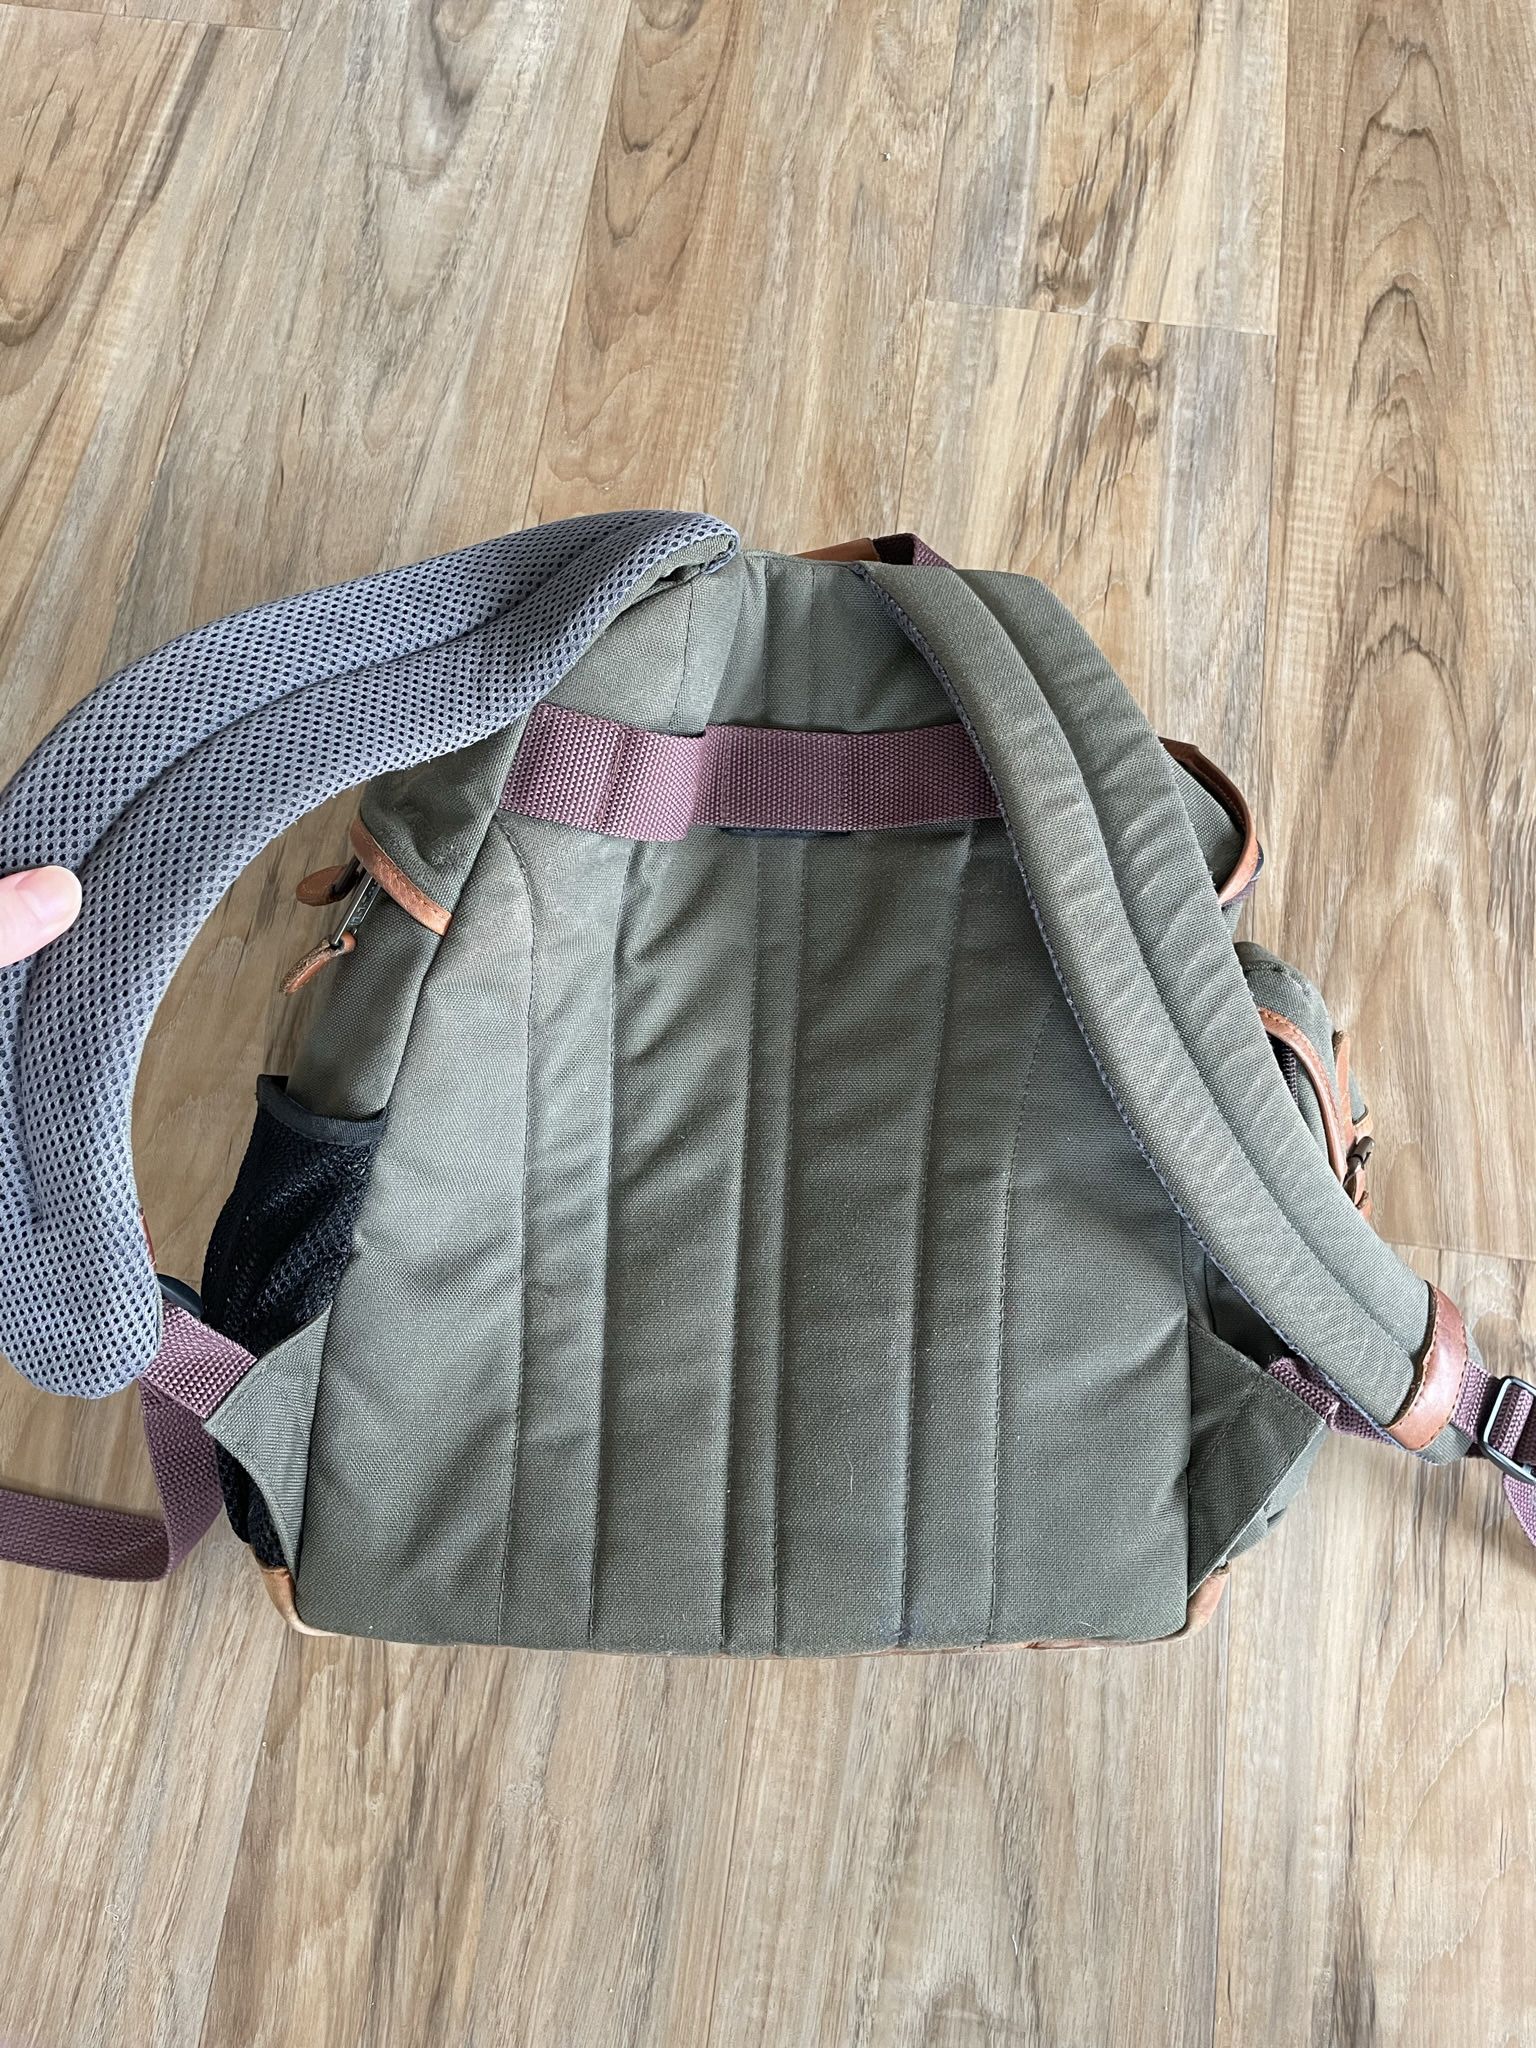 L.L. Bean Forest Green Safari Style Backpack